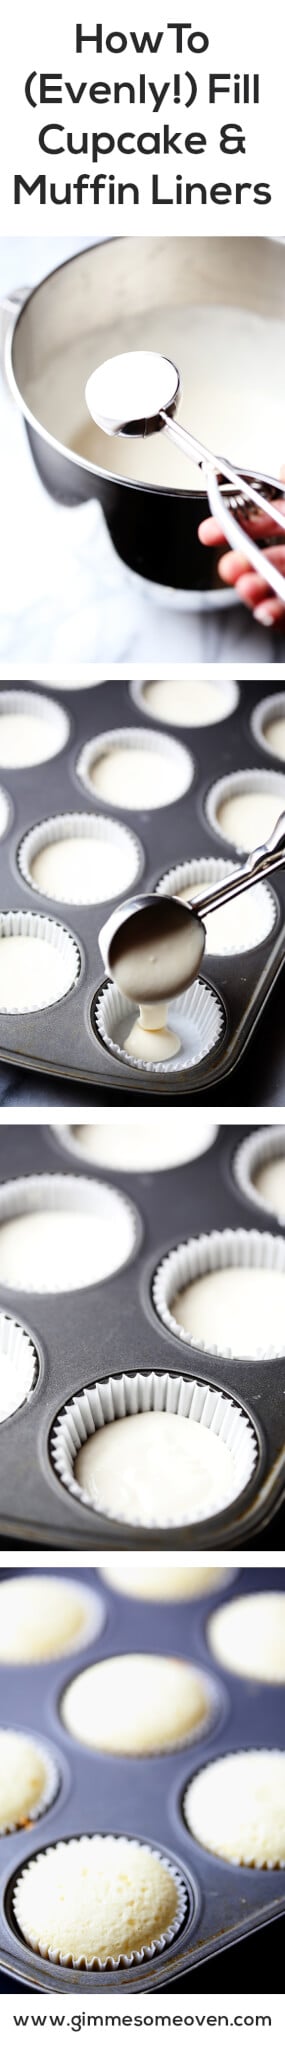 How To (Evenly!) Fill Cupcake & Muffin Liners | gimmesomeoven.com